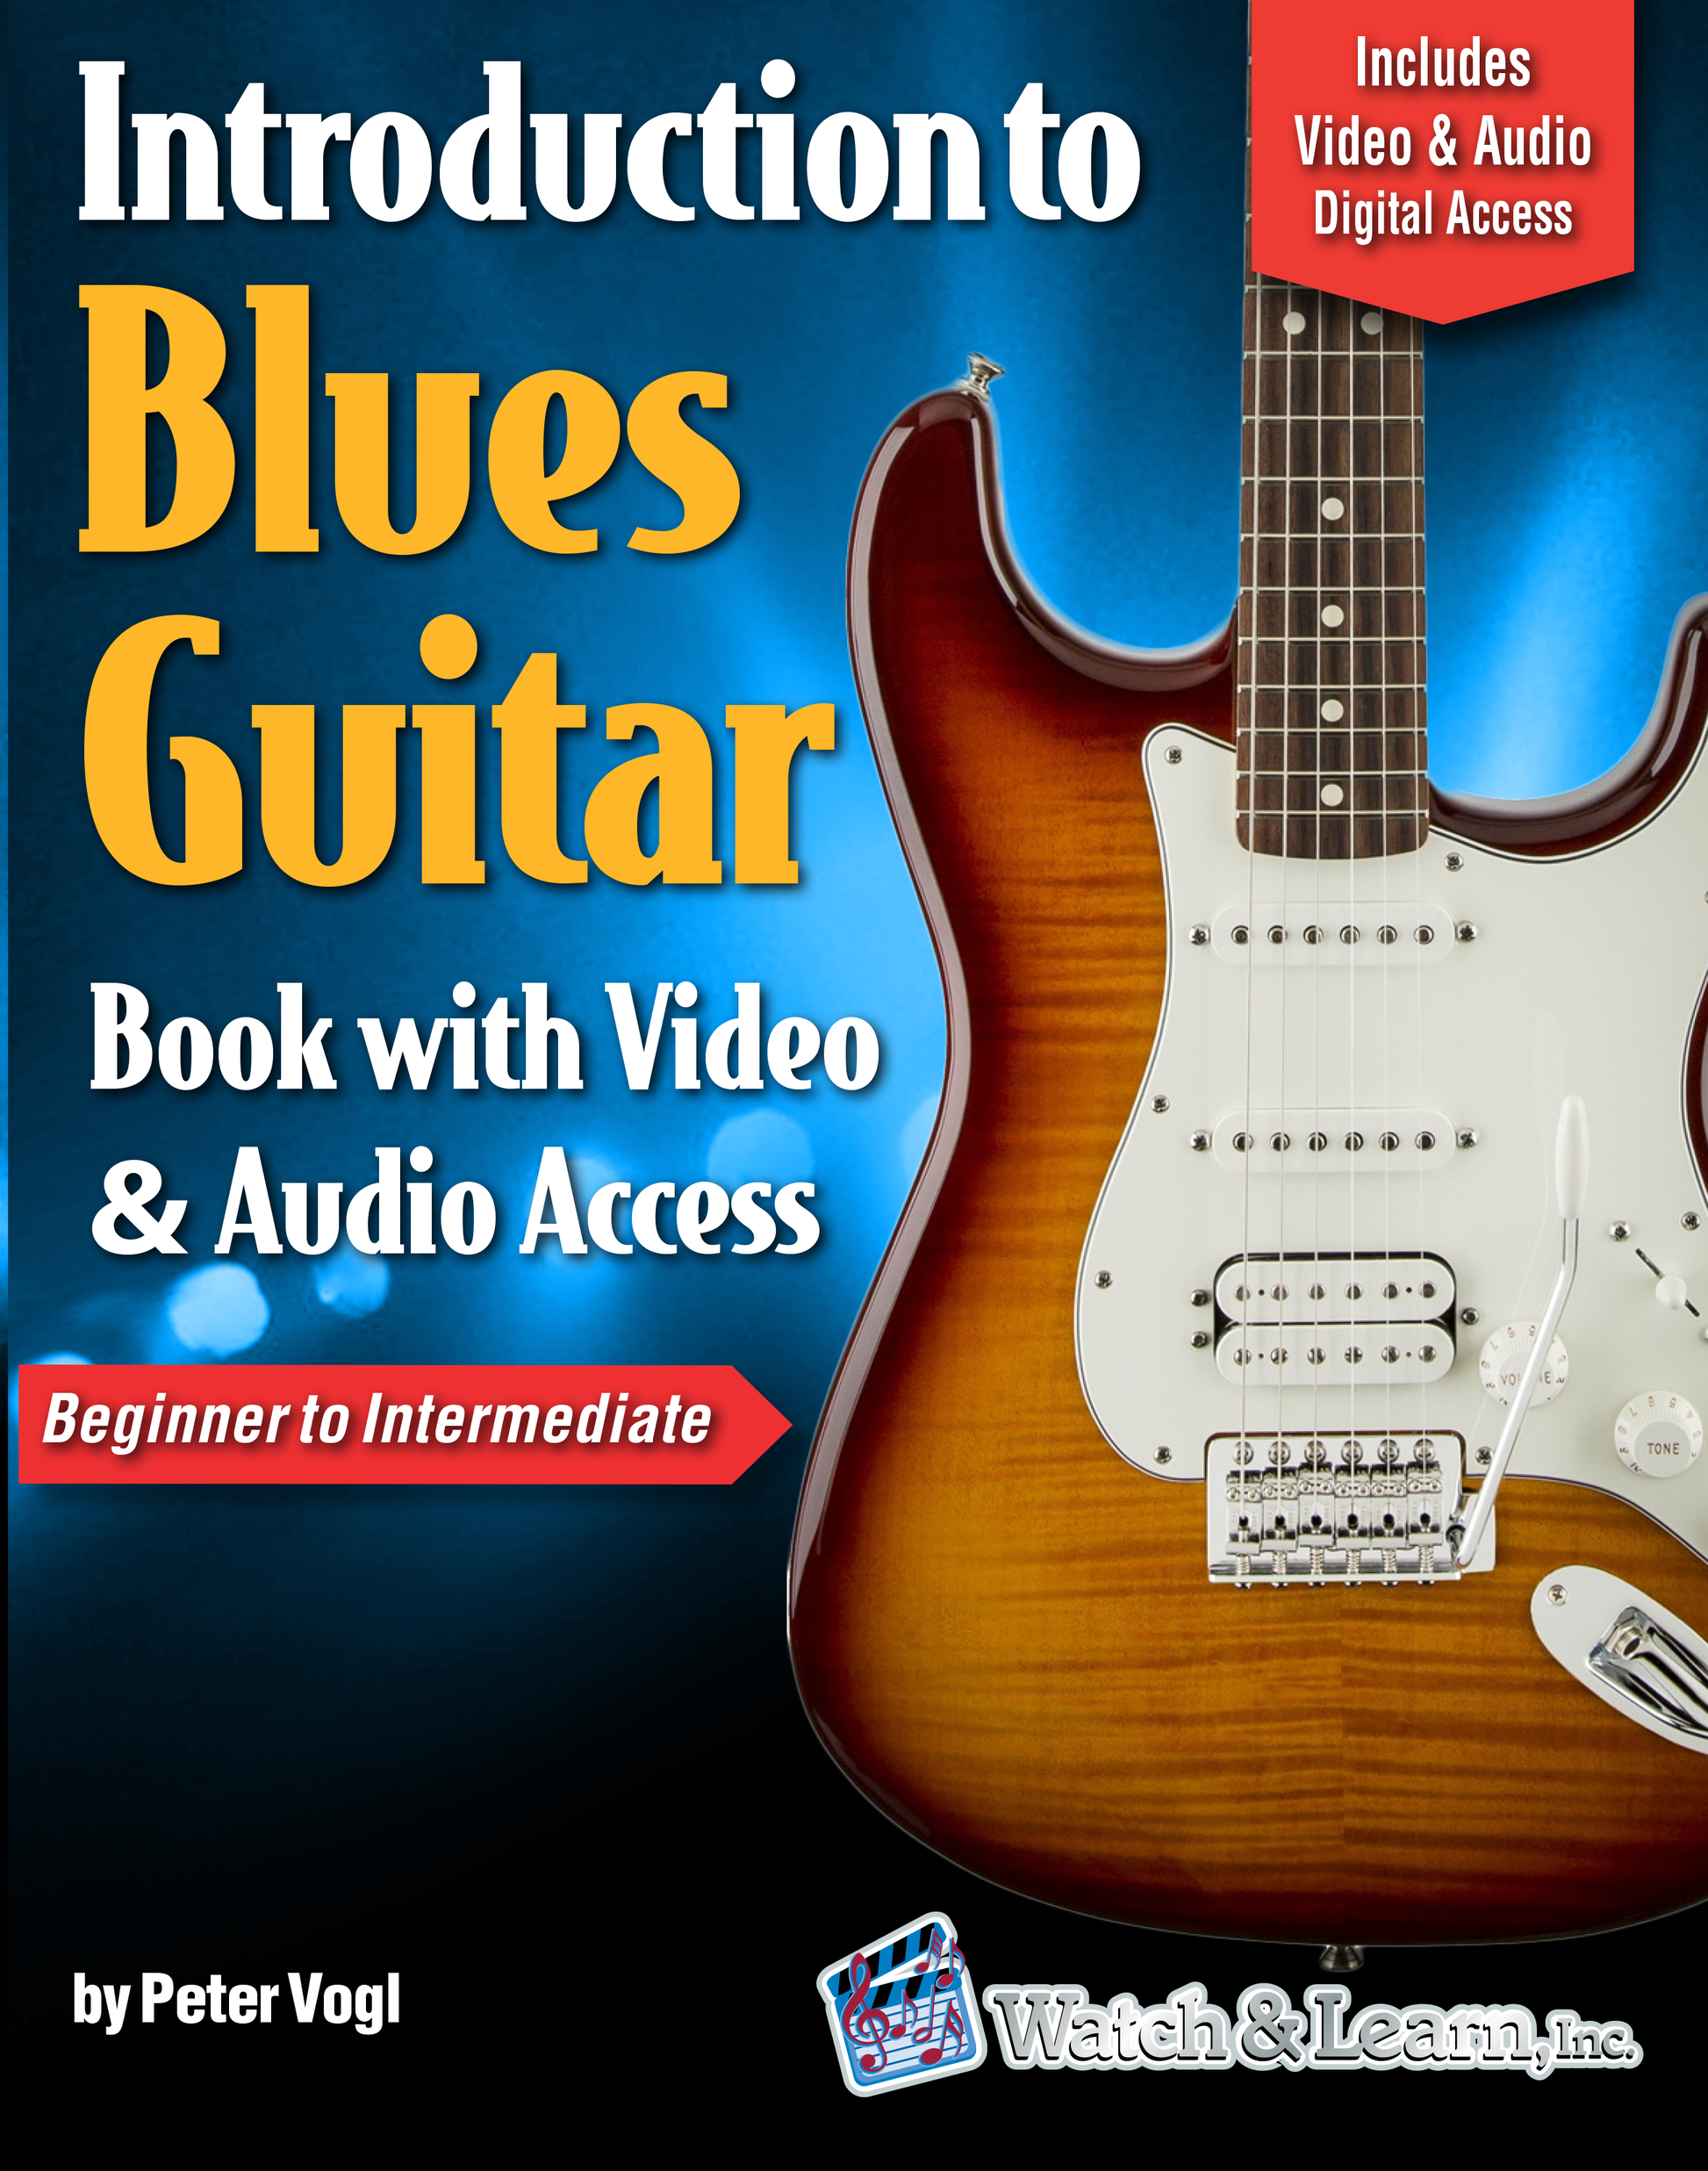 Image 1 of Introduction to Blues Guitar - SKU# 56-72 : Product Type Media : Elderly Instruments